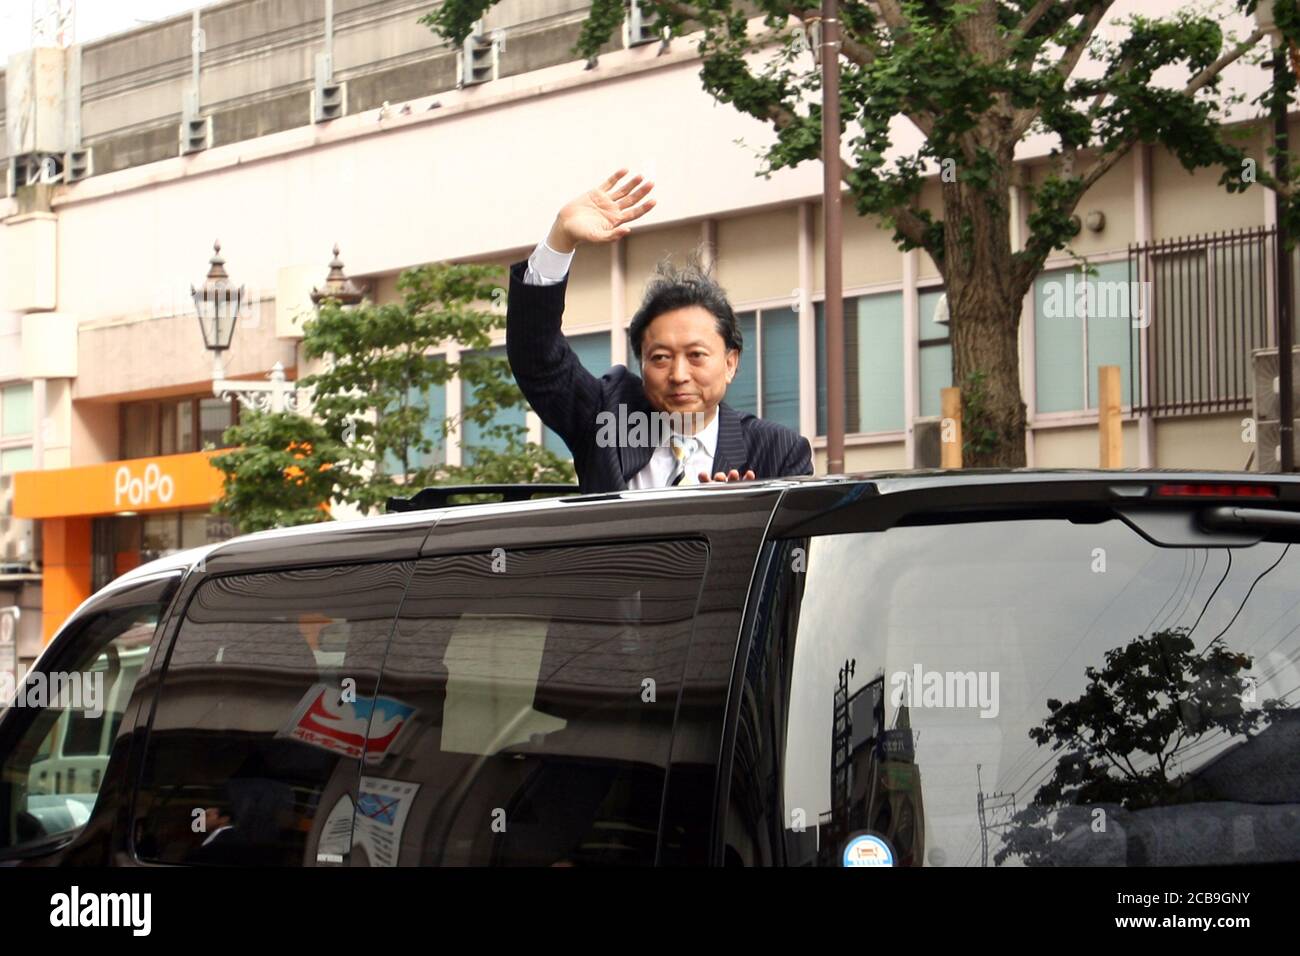 Tokyo, Japan. 3rd July, 2009. Yukio Hatoyama seen cheering supporters in the streets of Tokyo. Yukio Hatoyama, the leader of the Democratic Party of Japan performed a street oratory to ''take the seat of the first party from the Liberal Democratic Party in Tokyo congressist election'' at the Edogawa-ku, Tokyo Koiwa station square. Credit: James Matsumoto/SOPA Images/ZUMA Wire/Alamy Live News Stock Photo